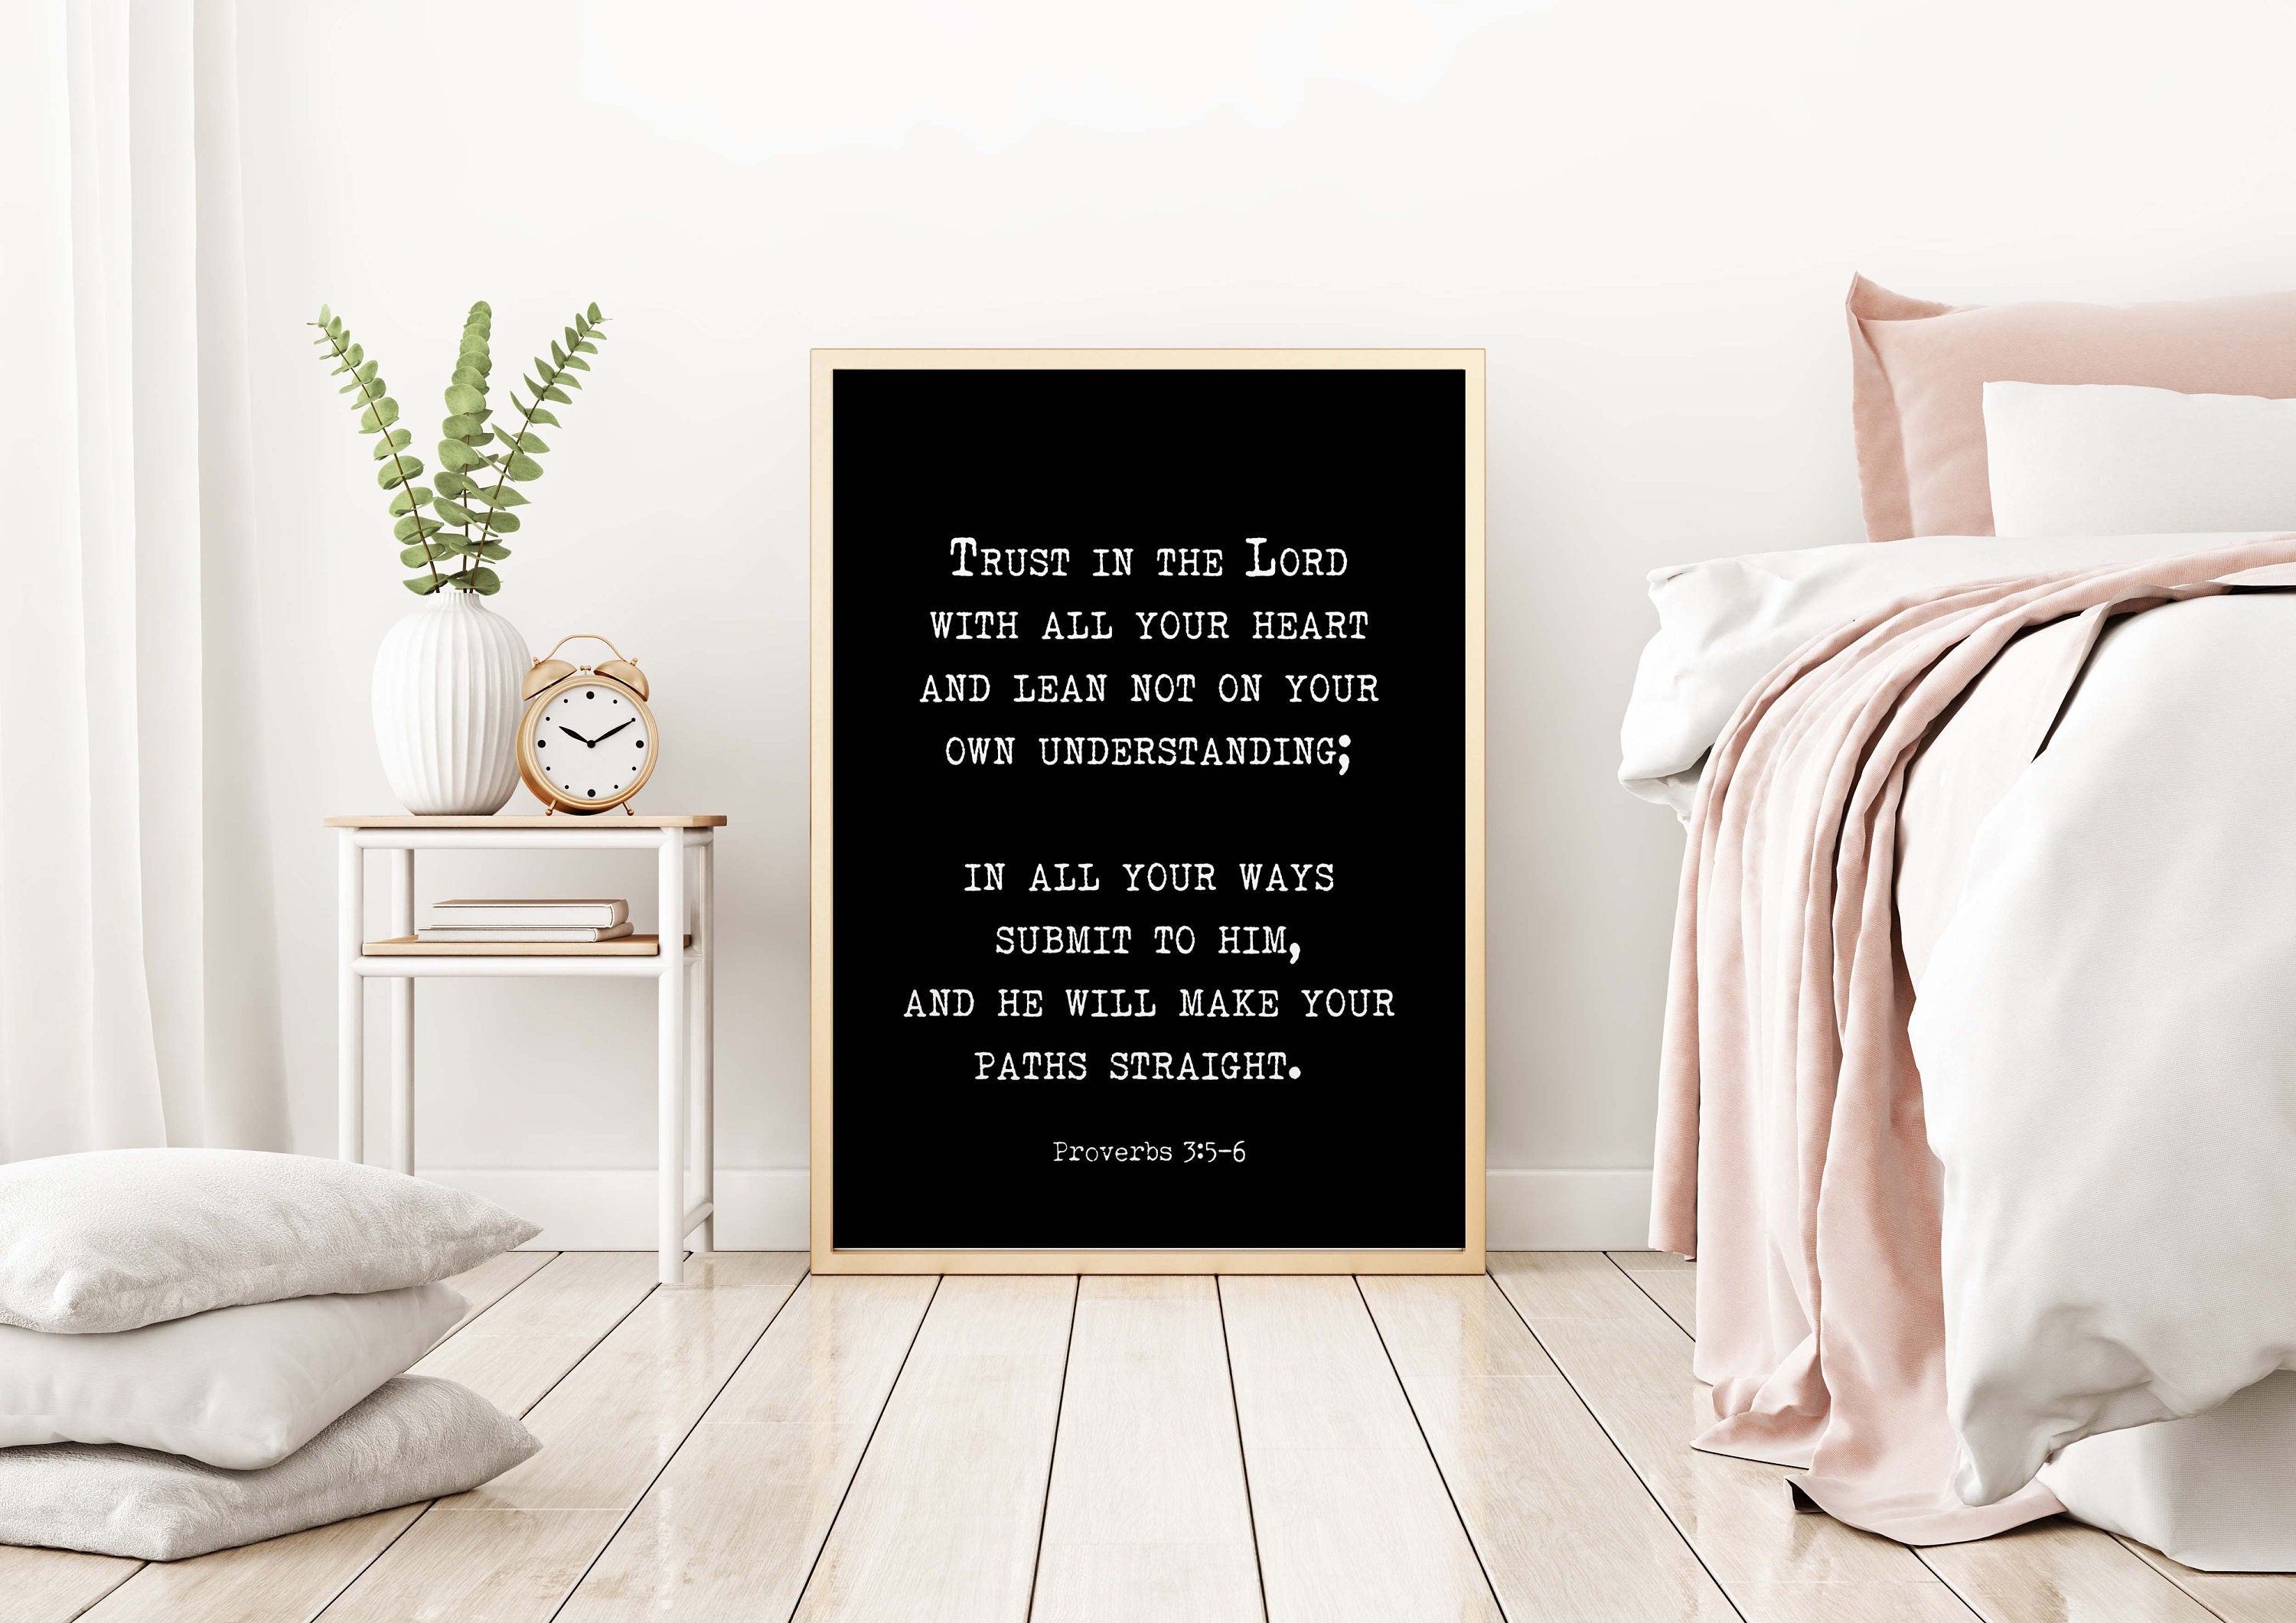 Trust in the LORD Proverbs 3:5-6 Bible Verse Print, Inspirational Gift Wall Art in Black & White